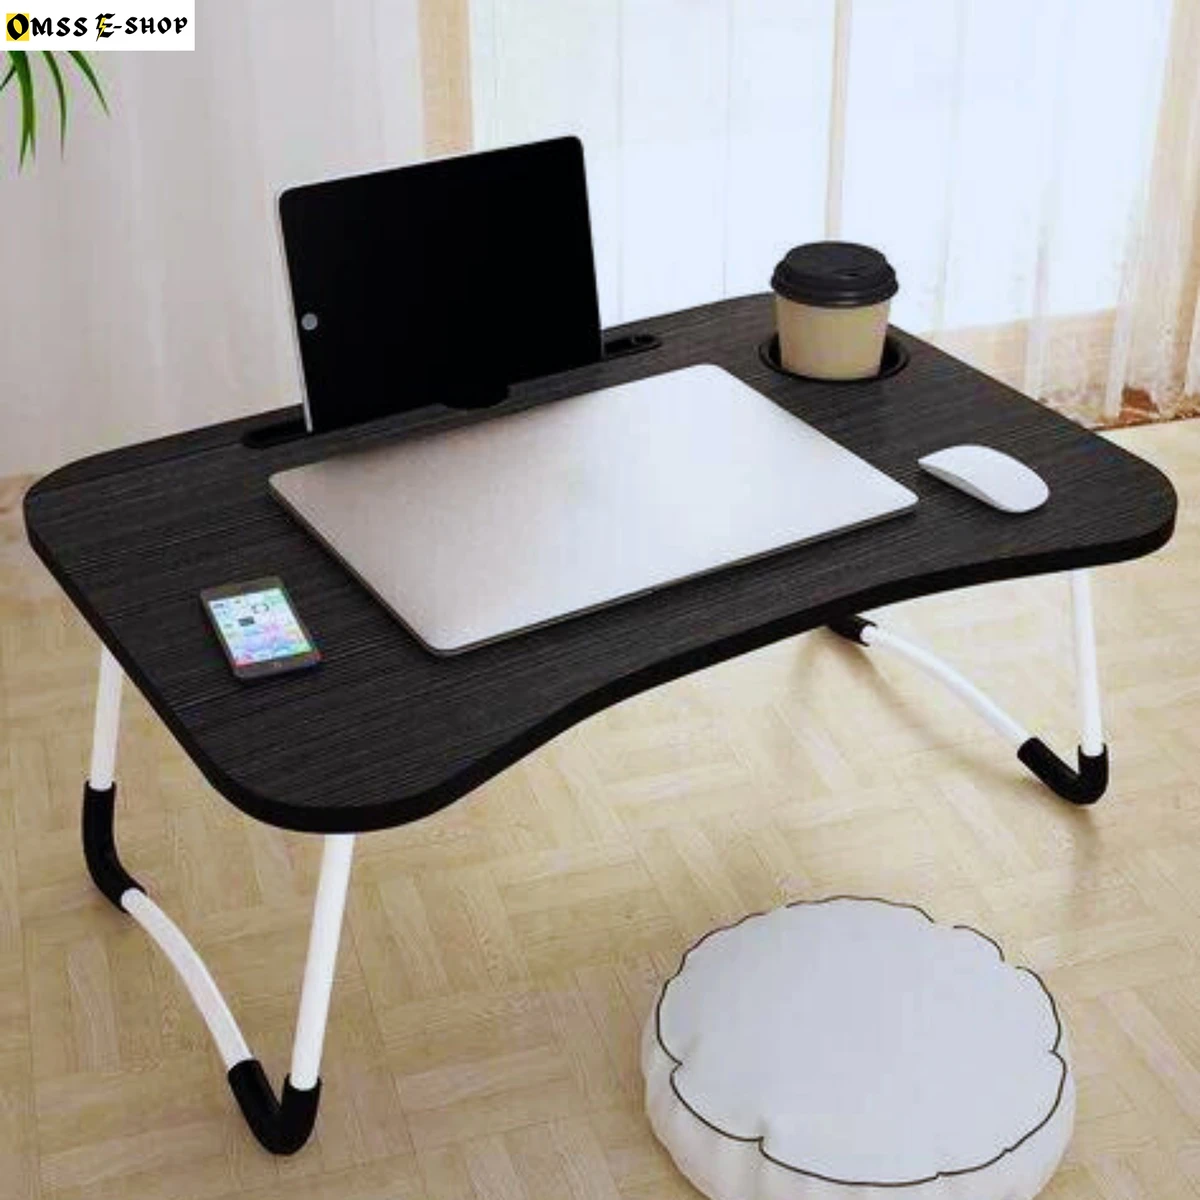 Foldable Wooden Mini Laptop desk for Couch, Sofa Bed, Study Tray Table Stand for Writing